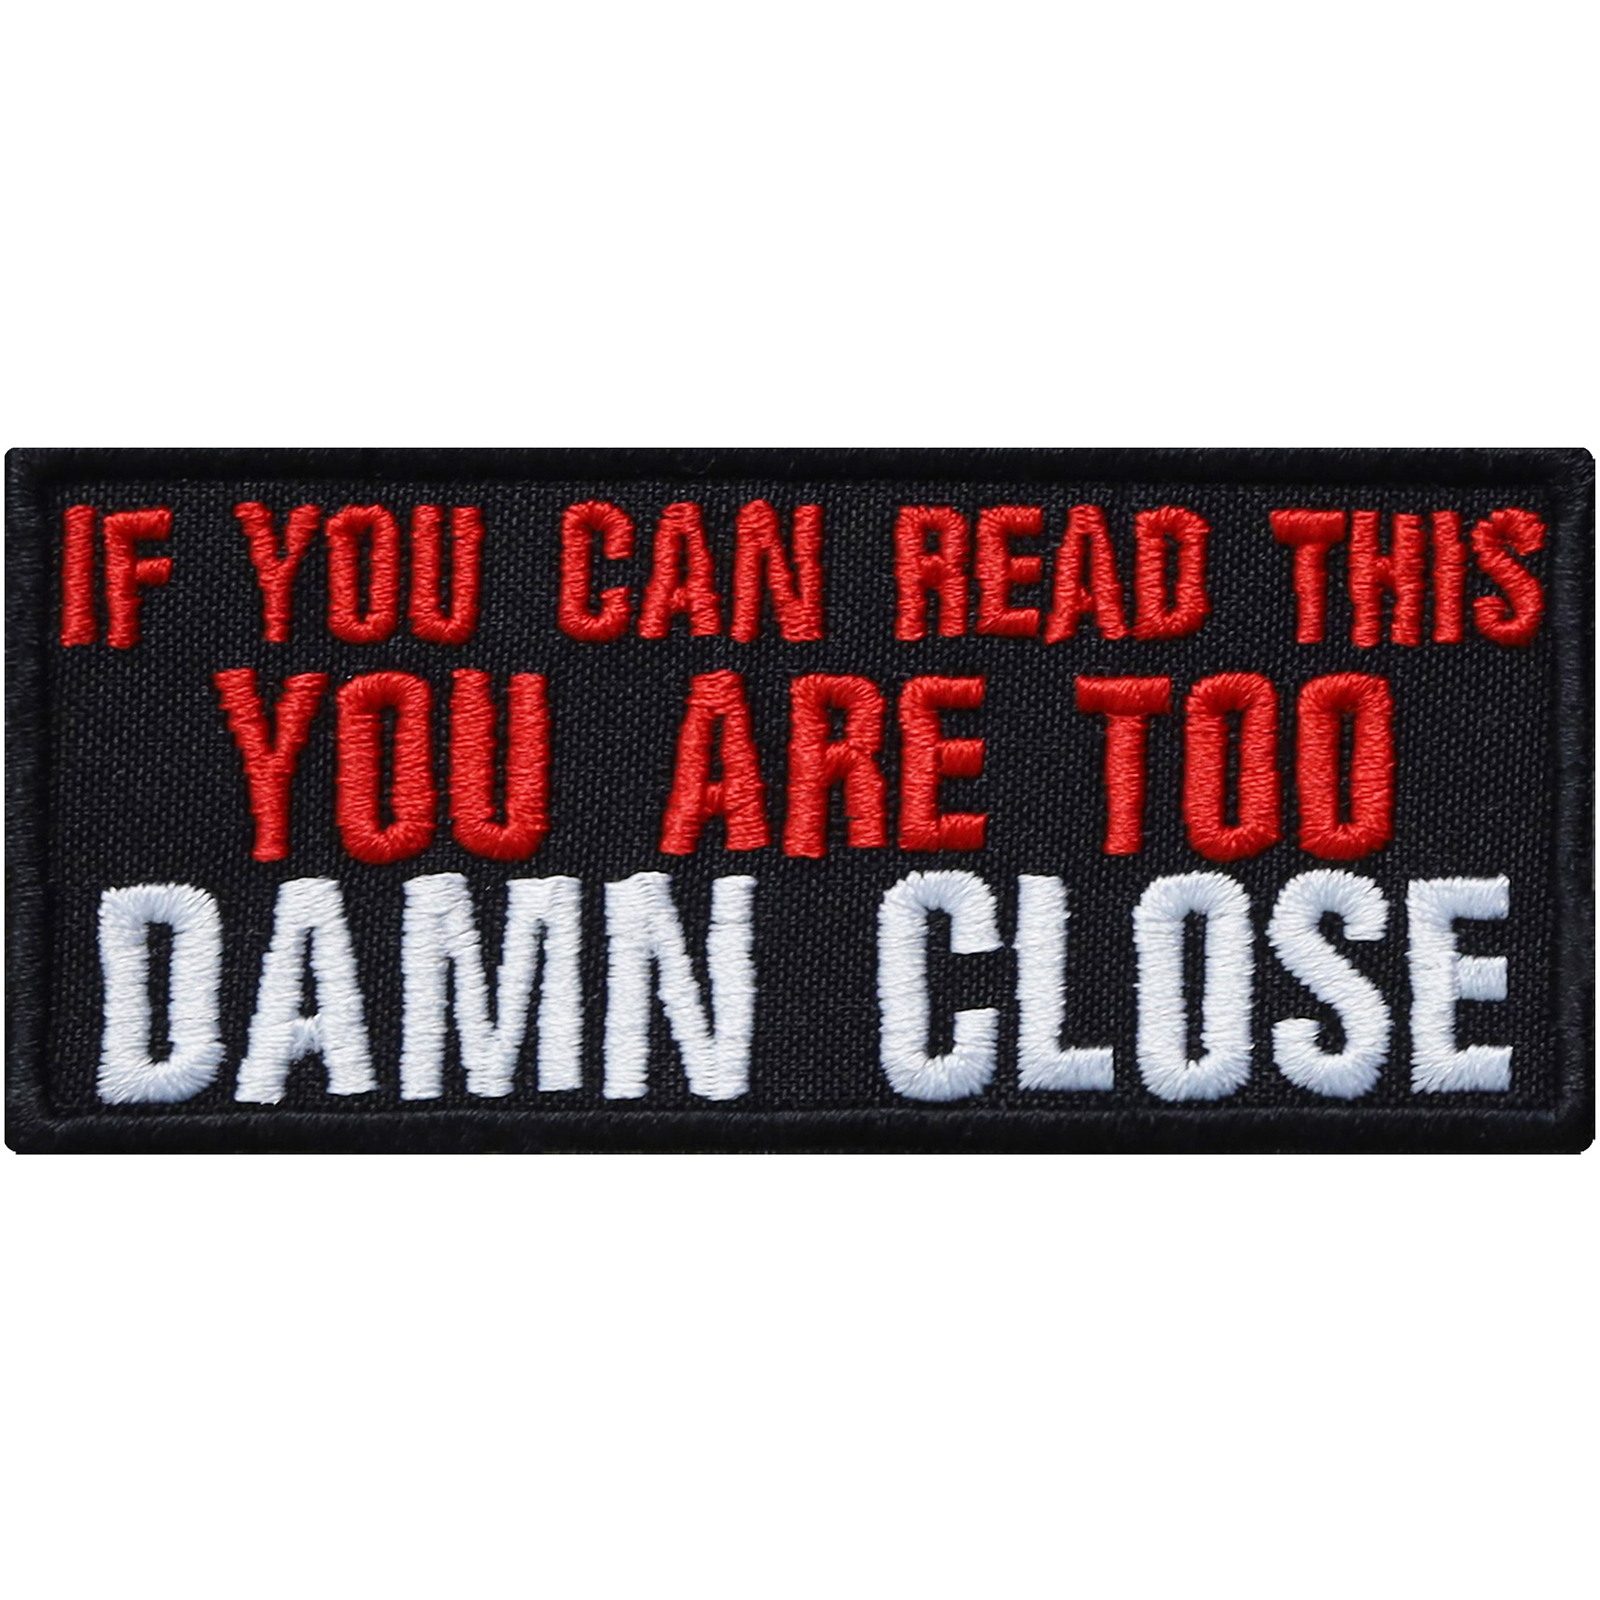 If you can read this, you are too damn close - Patch